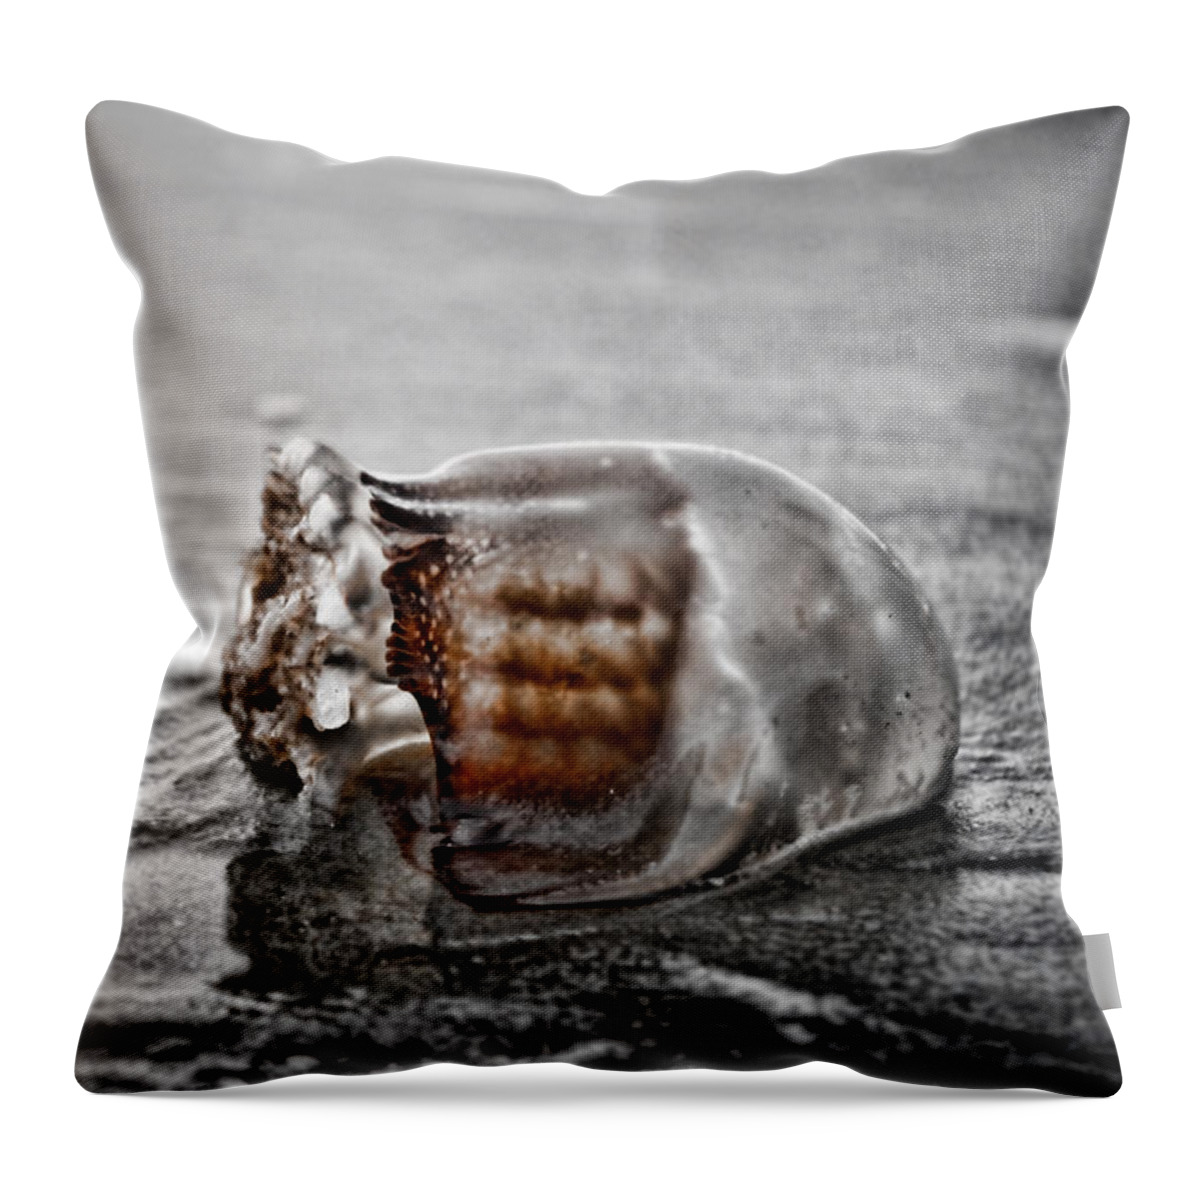 Popek Throw Pillow featuring the photograph Beach Jelly by Sharon Popek